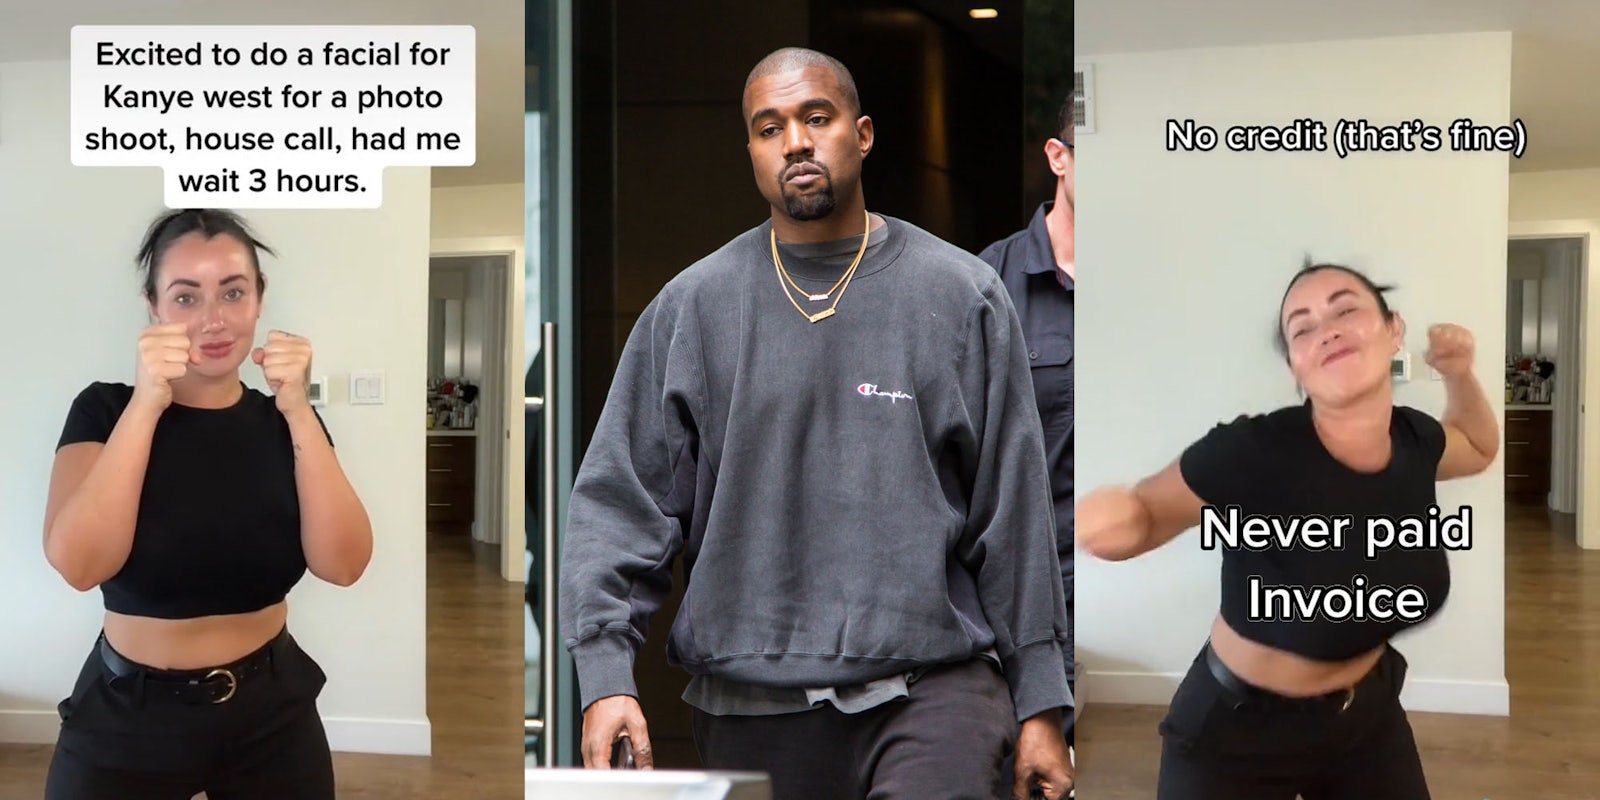 Woman standing with hands in fighting position caption 'Excited to do a facial for Kanye West for a photo shoot, house call, had me wait 3 hours.' (l) Kanye West walking (c) Woman swinging fists caption 'No credit (that's fine) Never paid Invoice' (r)